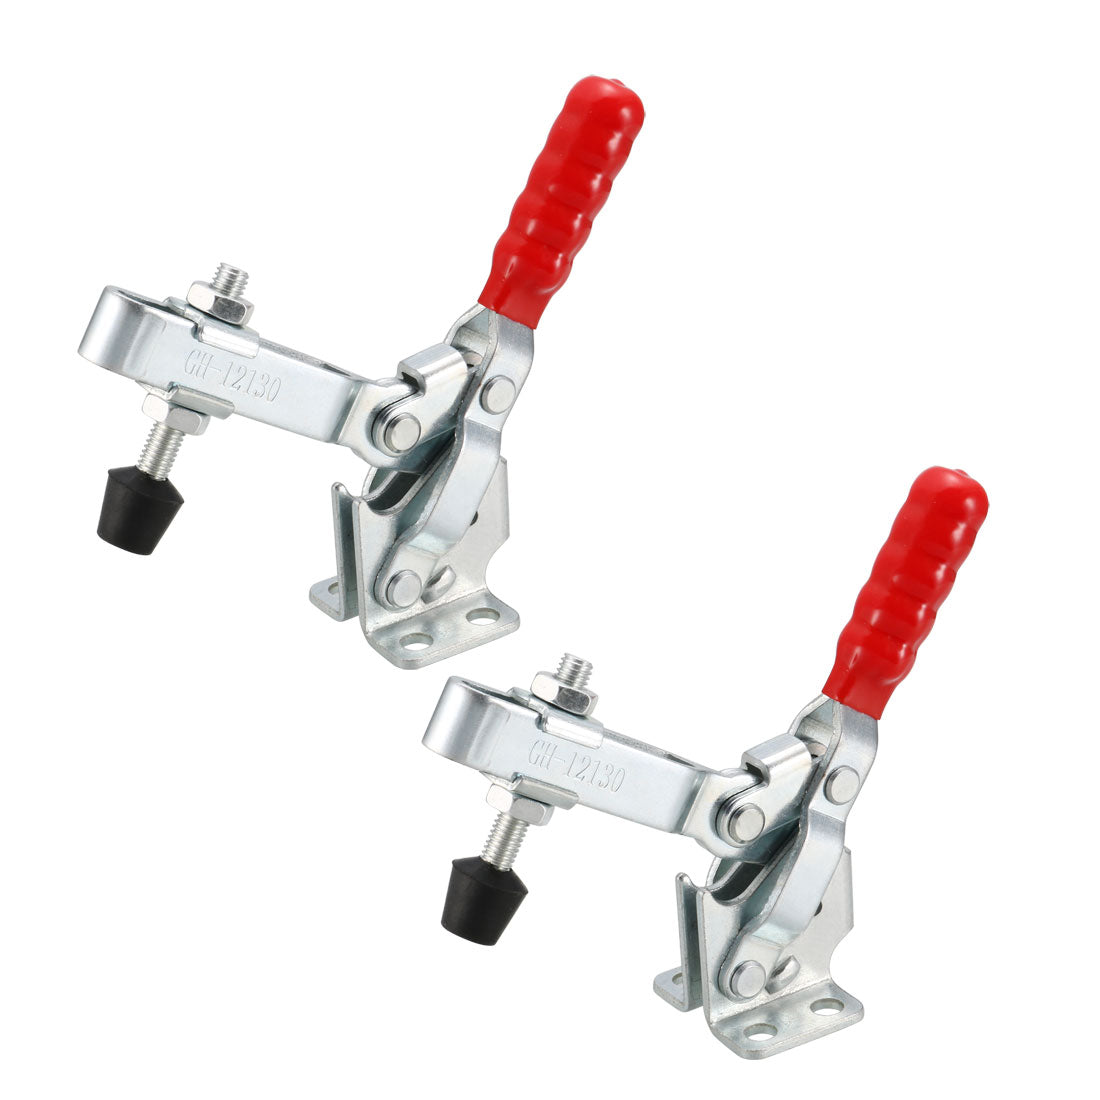 uxcell Uxcell 2 Pcs Hand Tool Vertical Toggle Clamp Quick Release Clamp 500 lbs/227kg